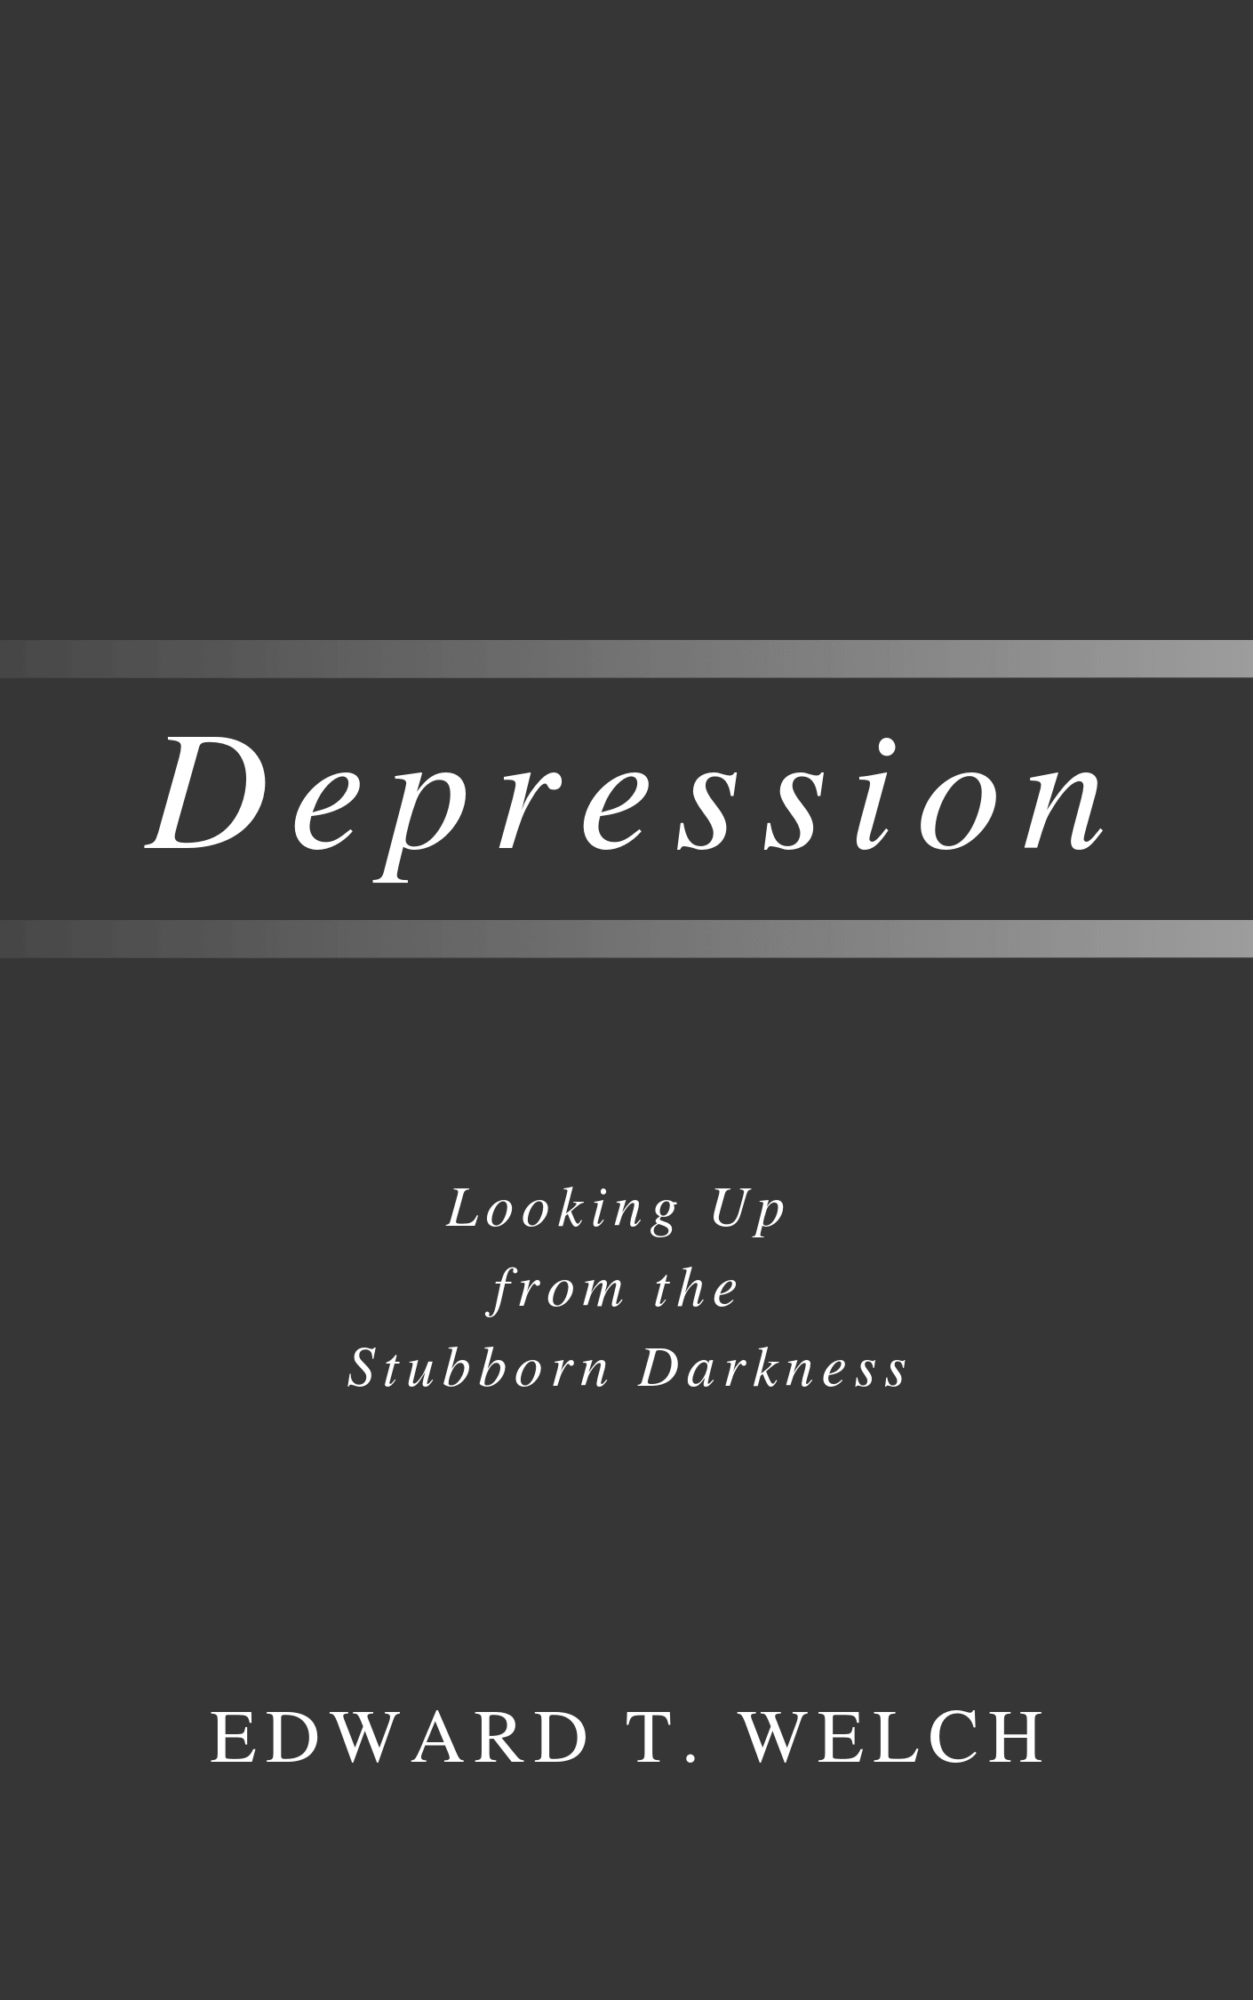 creative writing stories on depression